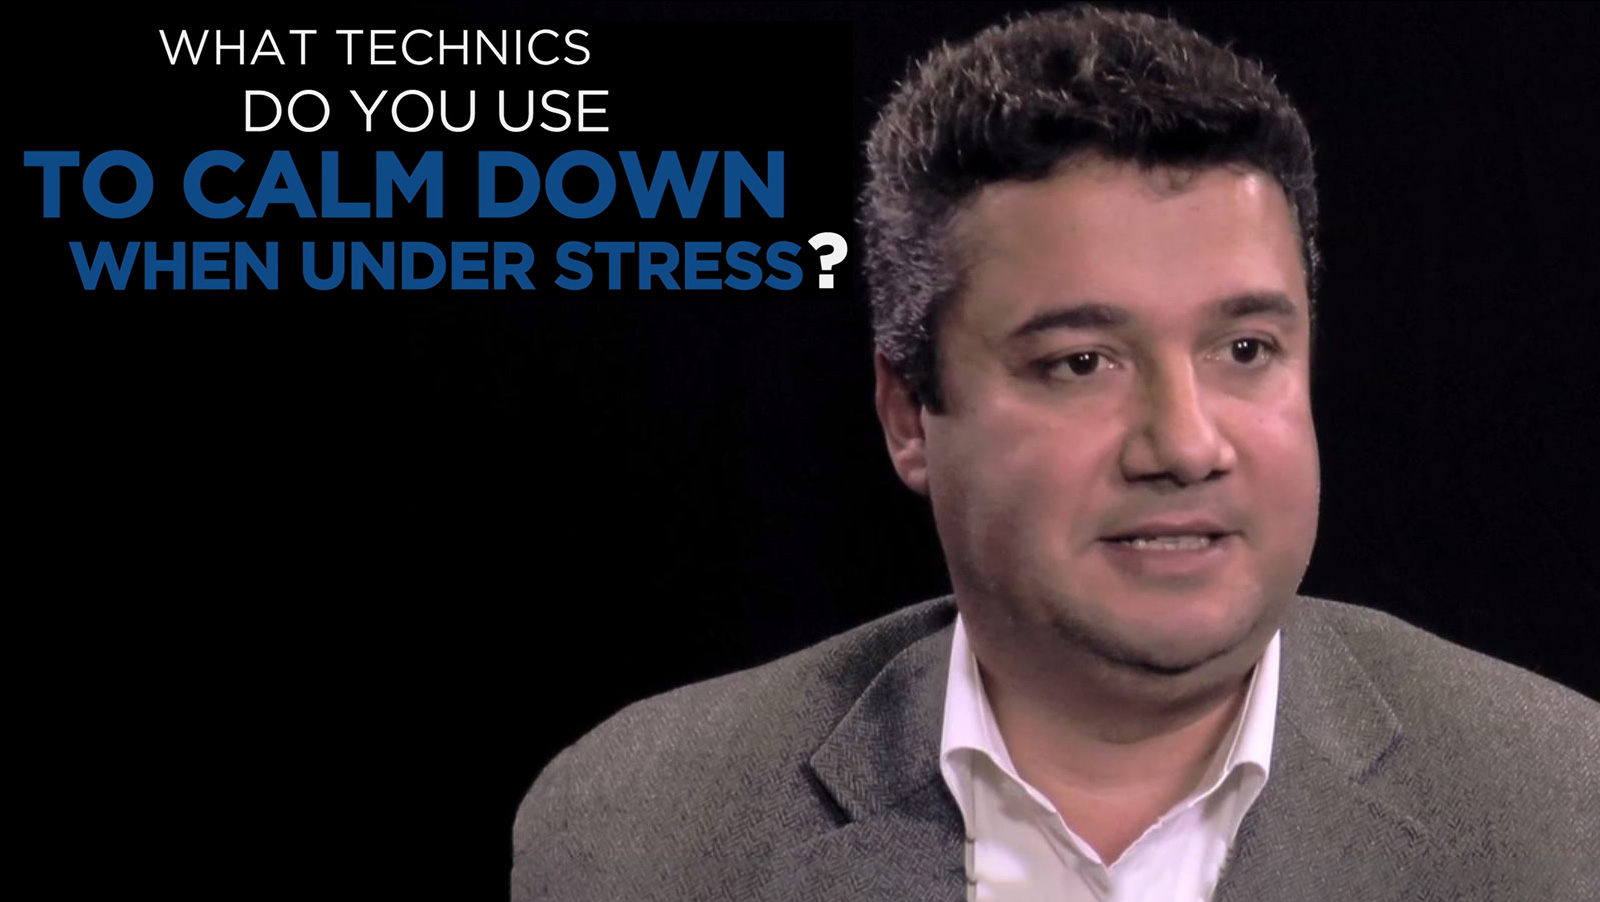 Hussein Chahine: Shared Experience - What Technics do you use to calm down when under stress?